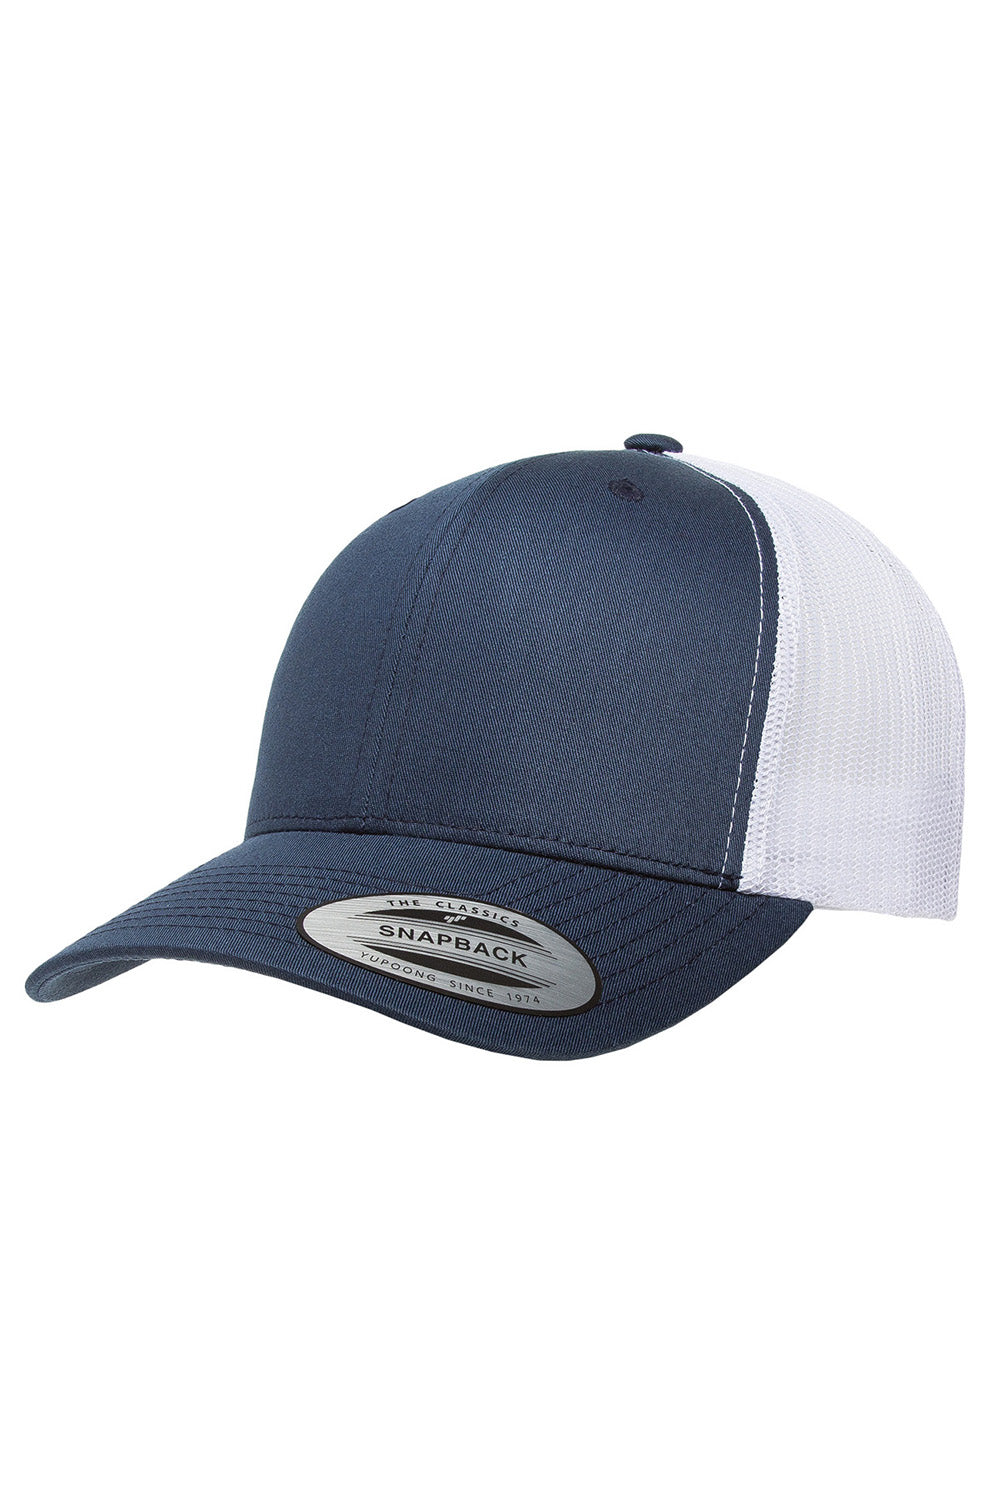 Yupoong 6606 Mens Adjustable Trucker Hat Navy Blue/White Front